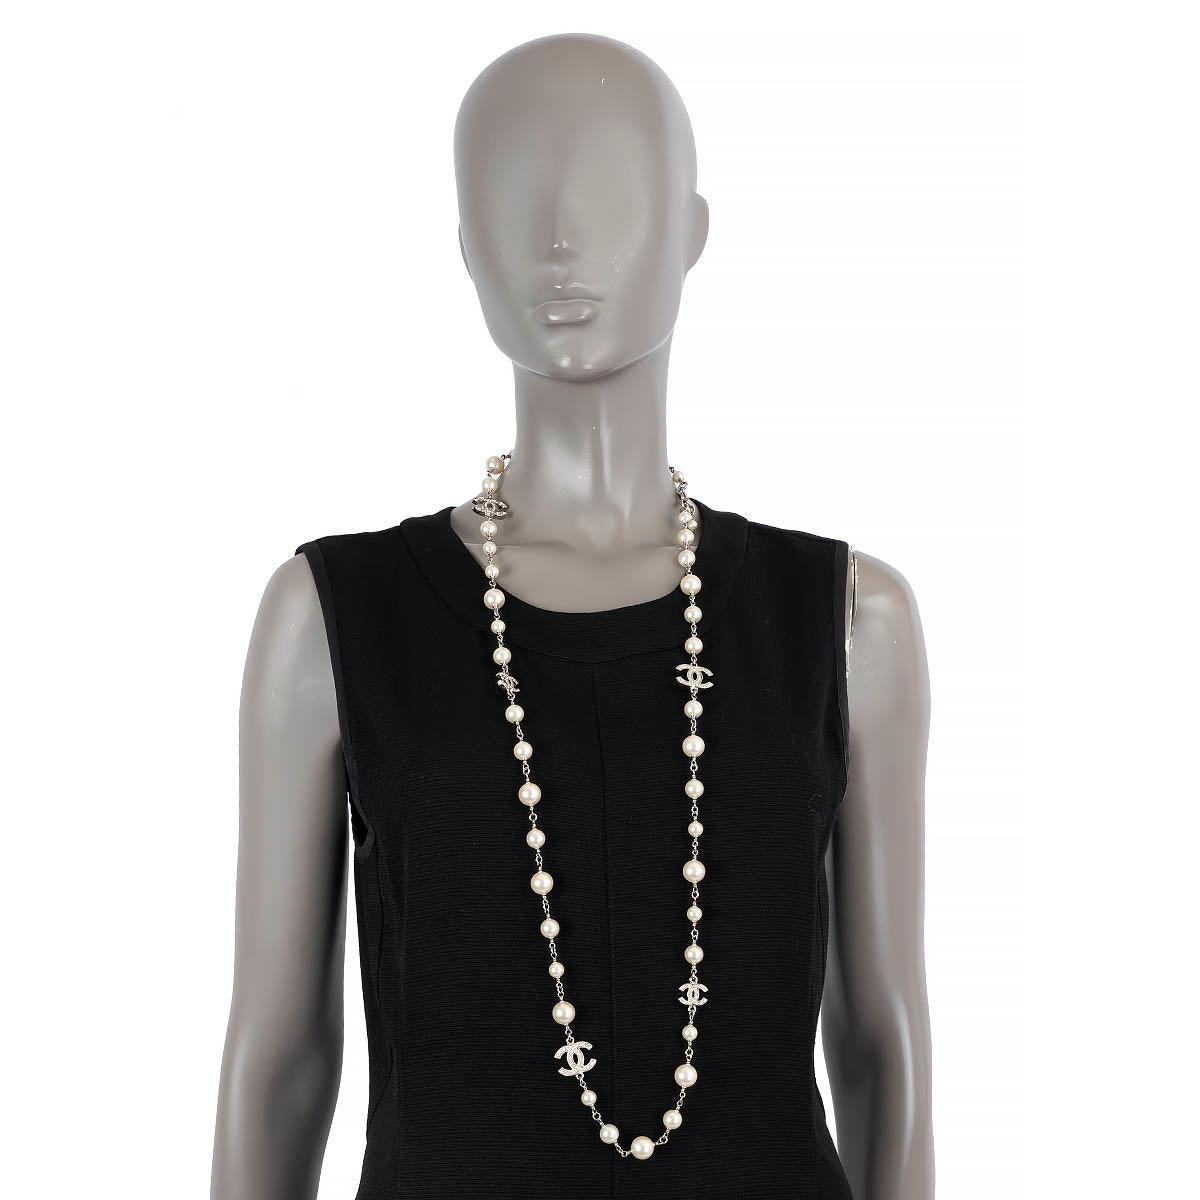 100% authentic Chanel long ivory faux pearl necklace embellished with rhinestone CC's. Has been worn and is in excellent condition. 

2011 Fall/Winter

Measurements
Model	Chanel11A
Width	2cm (0.8in)
Length	110cm (42.9in)
Hardware	Silver-Tone

All